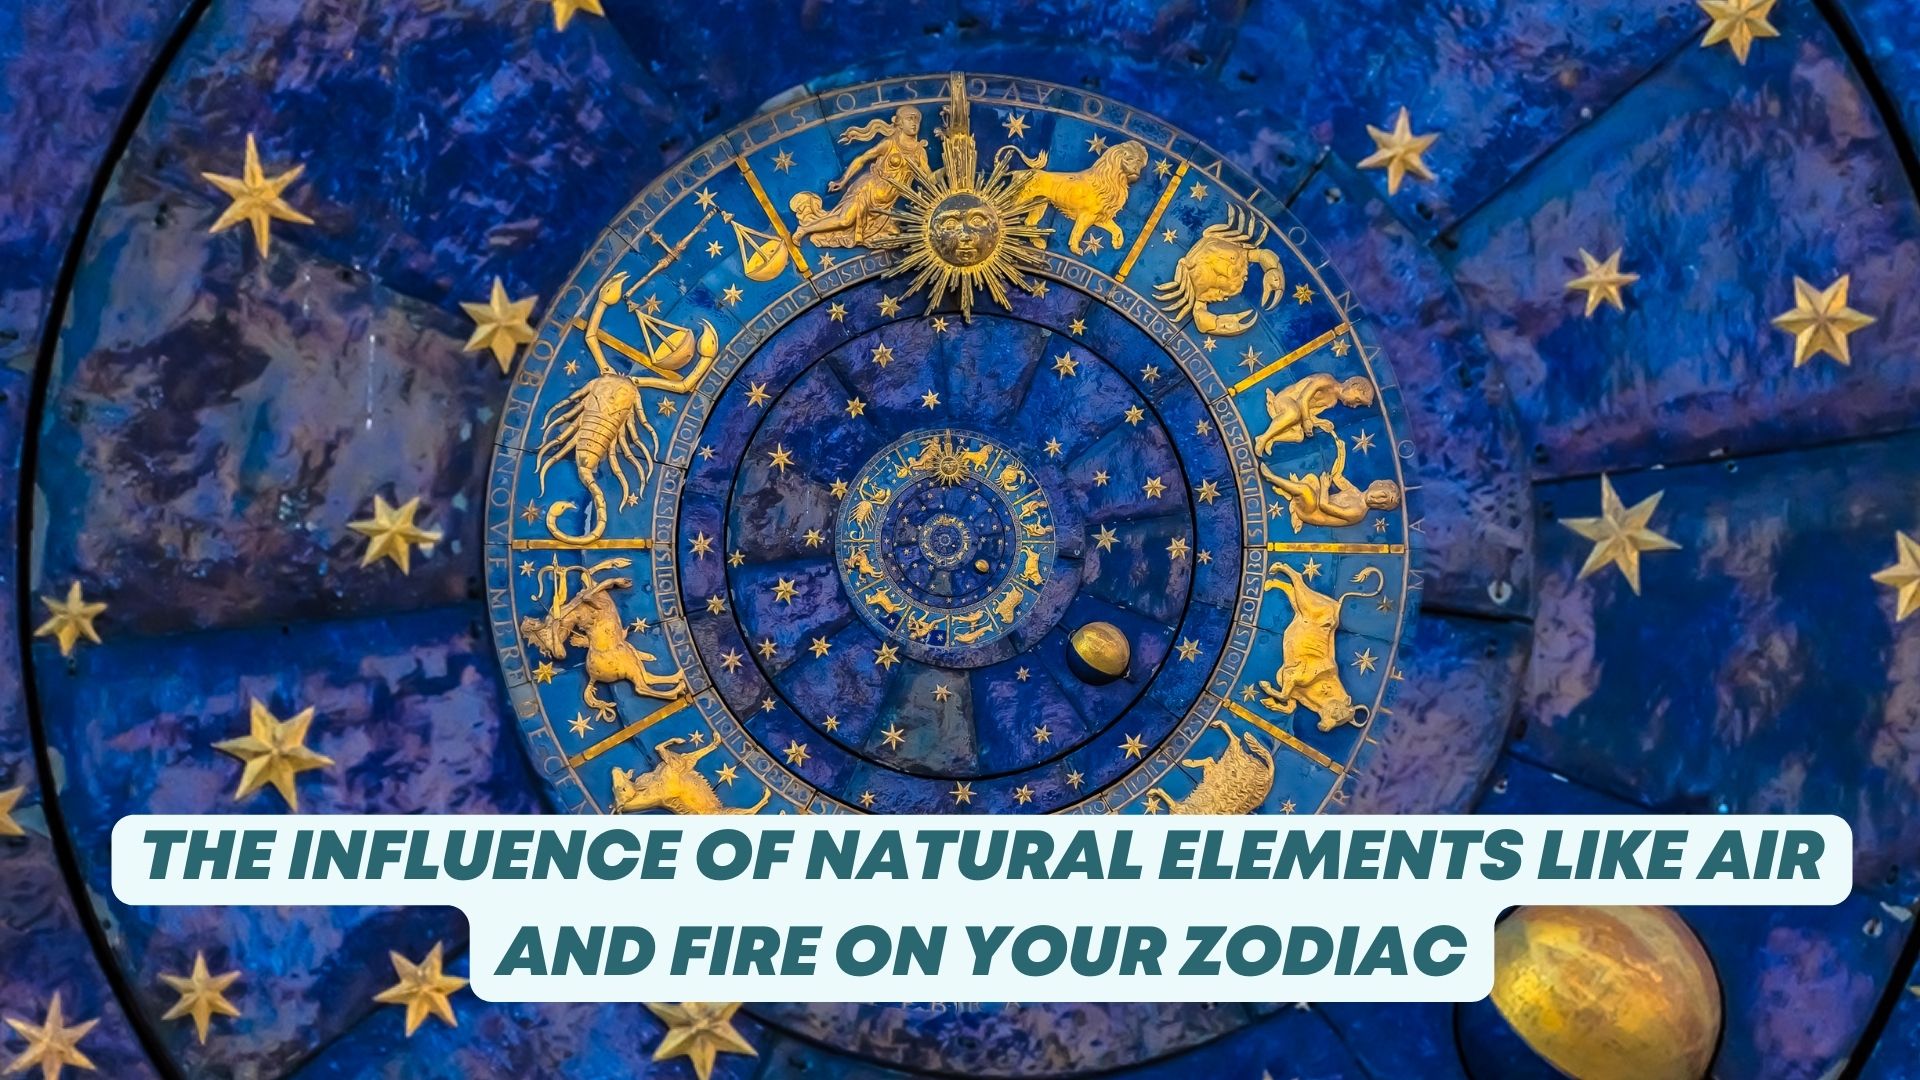 The Influence of Natural Elements Like Air and Fire on Your Zodiac